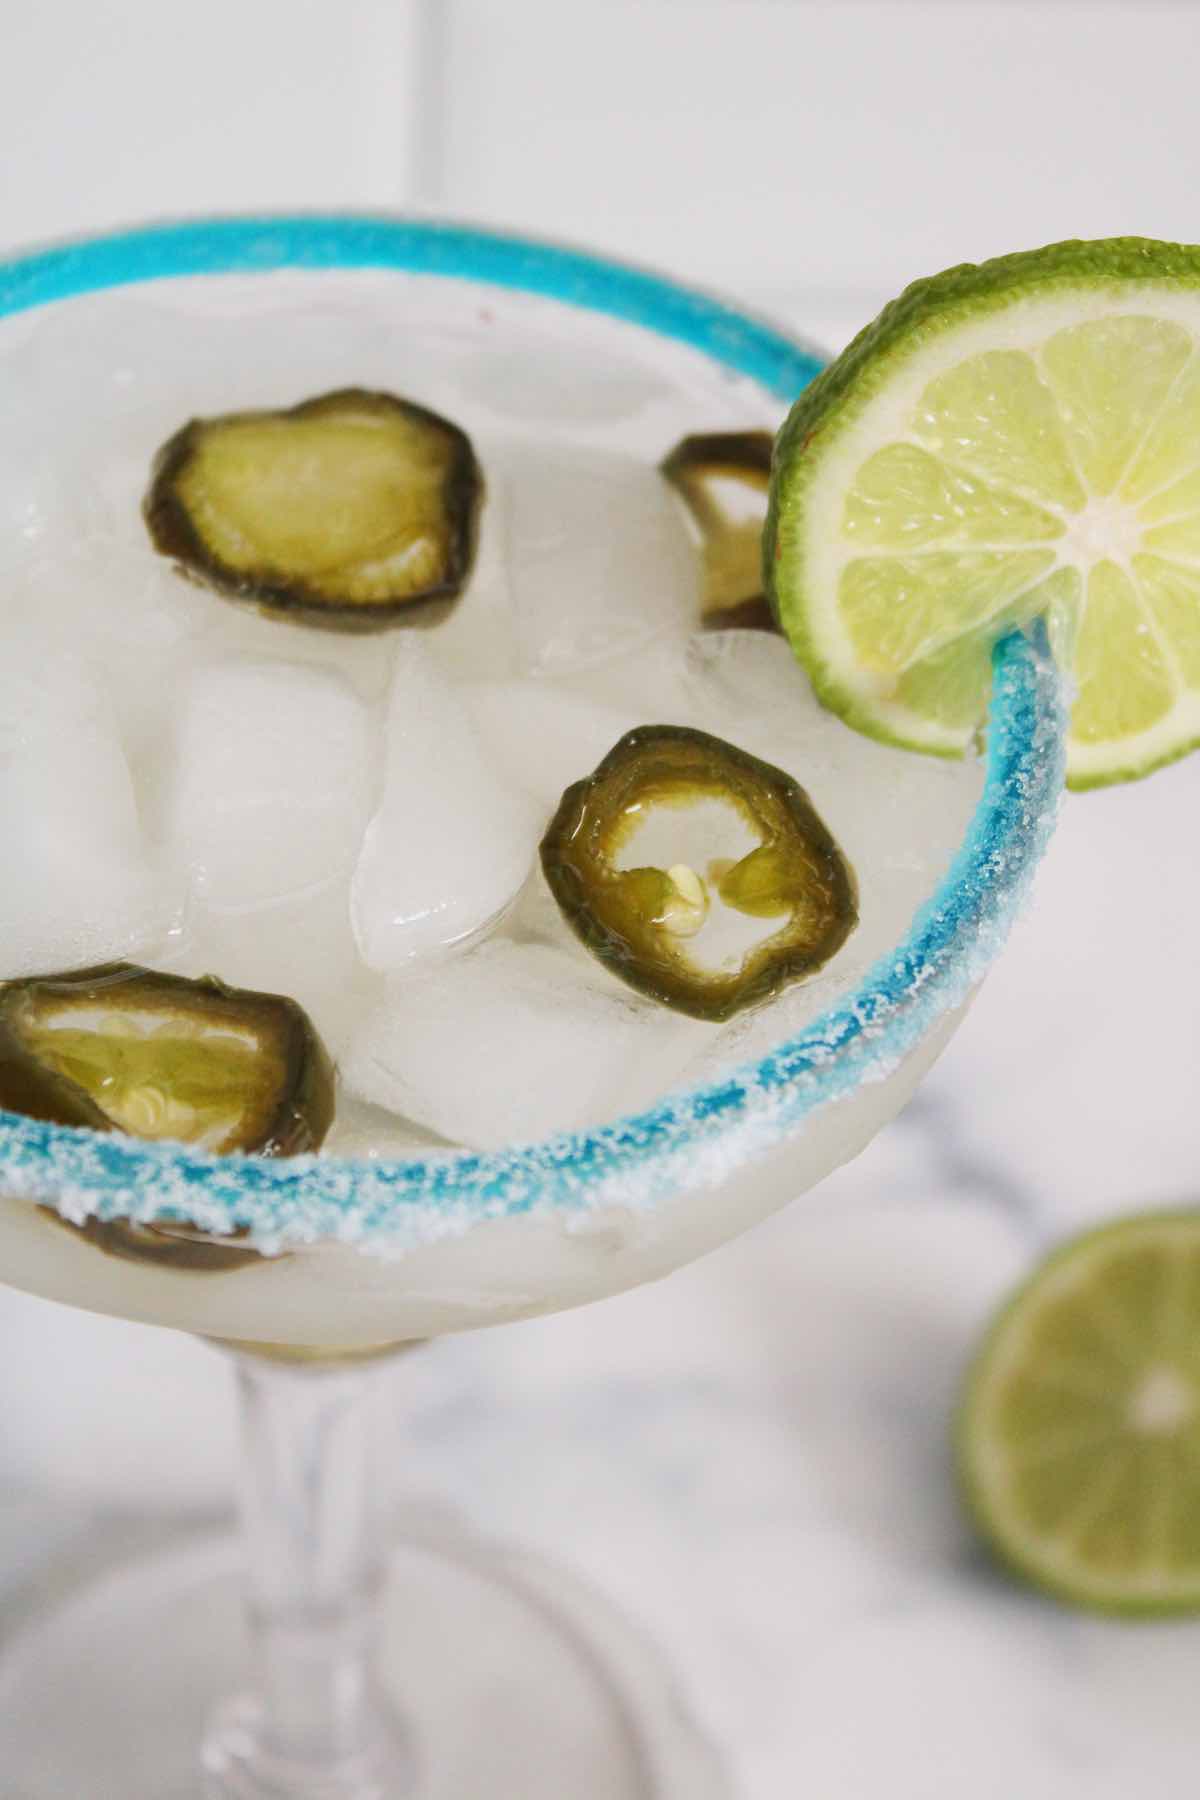 Enjoy a homemade spicy jalapeno margarita cocktail on your next happy hours.